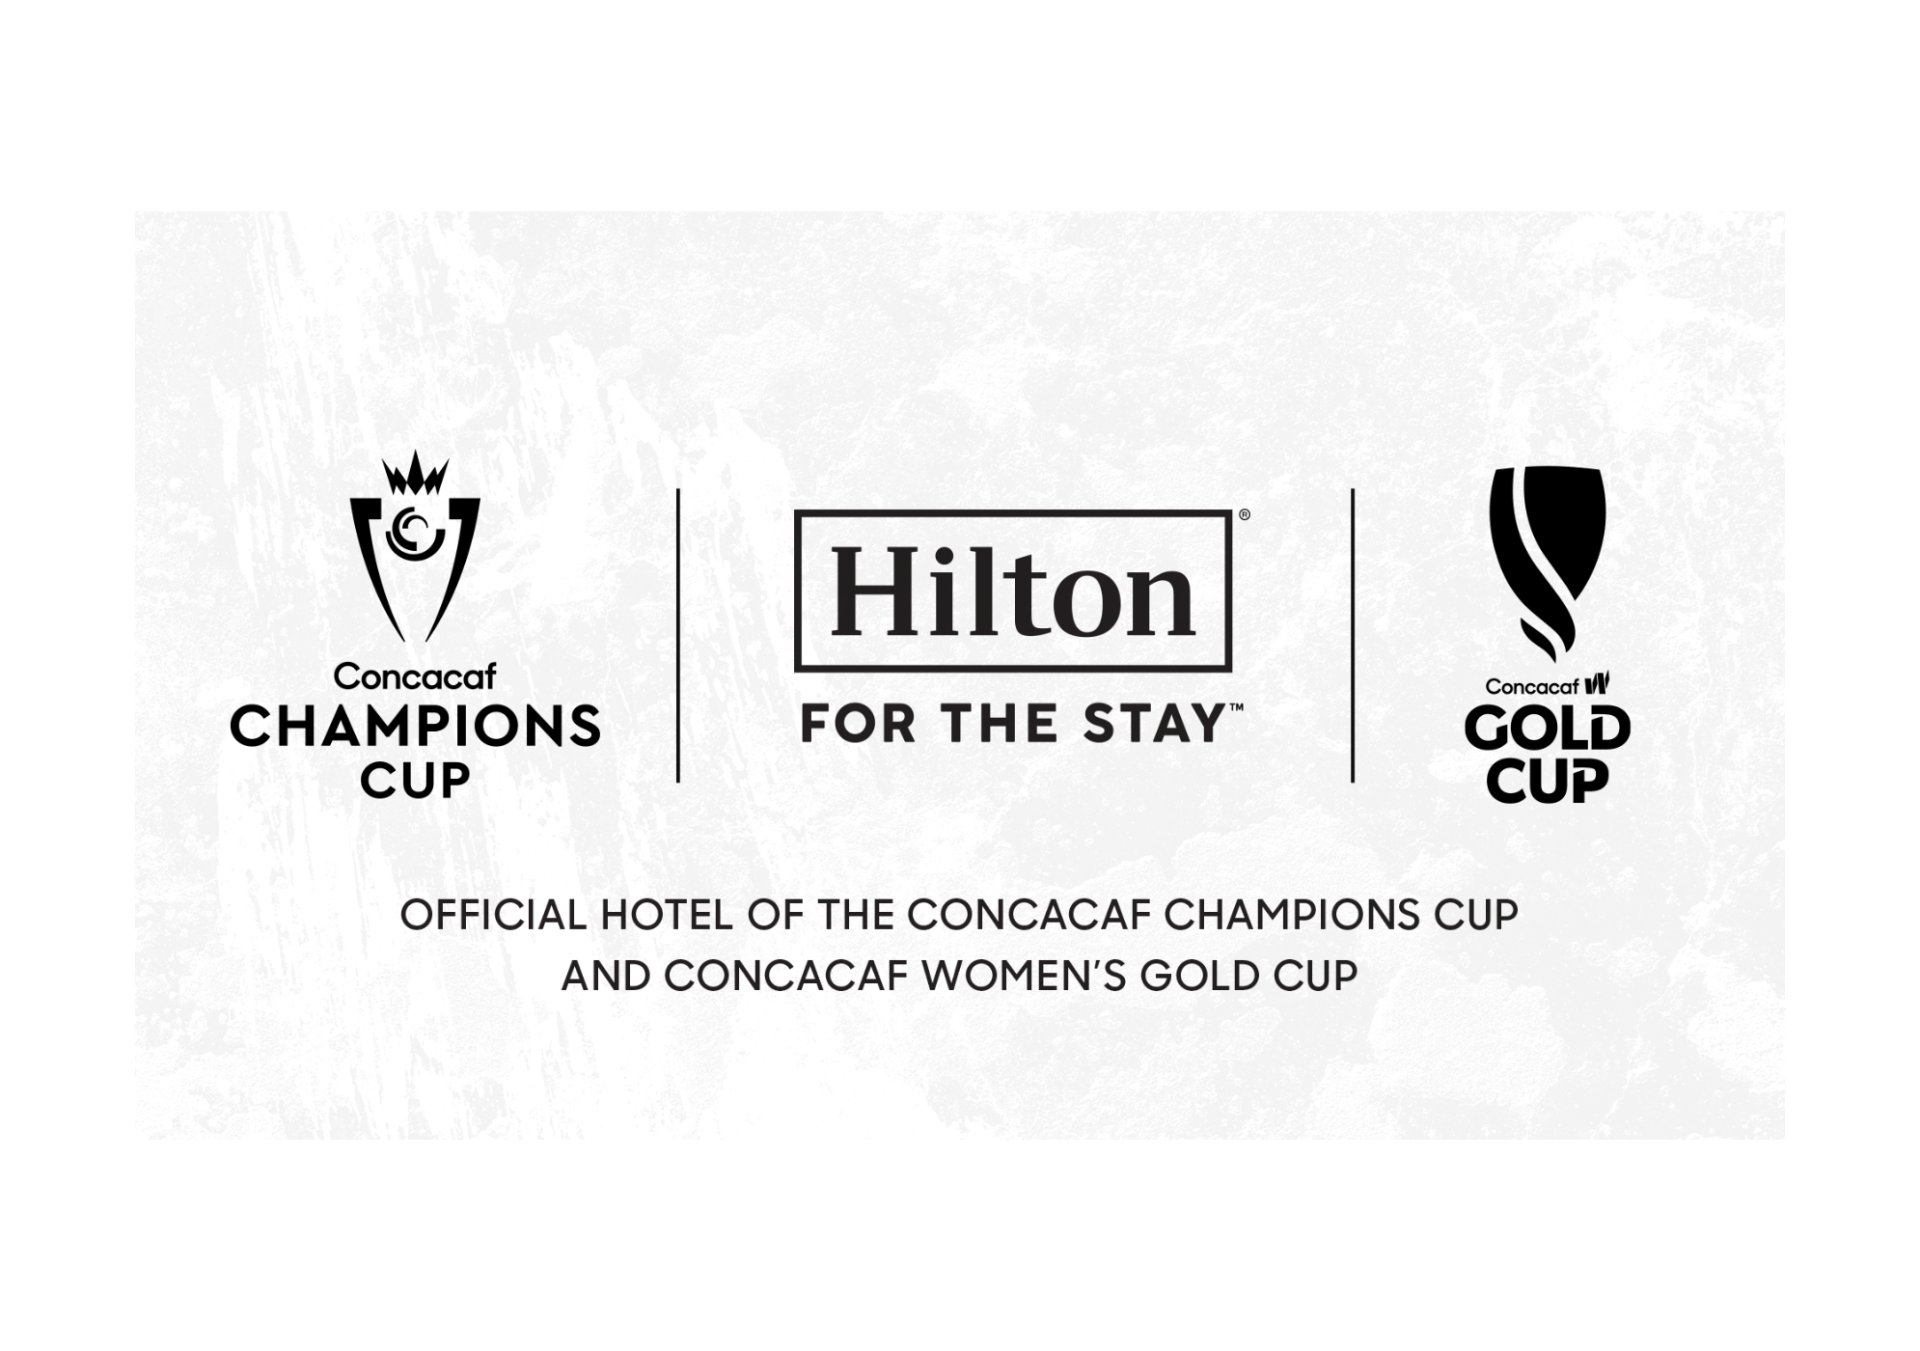 Concacaf and Hilton - Official Hotel of the Concacaf Champions Cup and Concacaf Women's Gold Cup